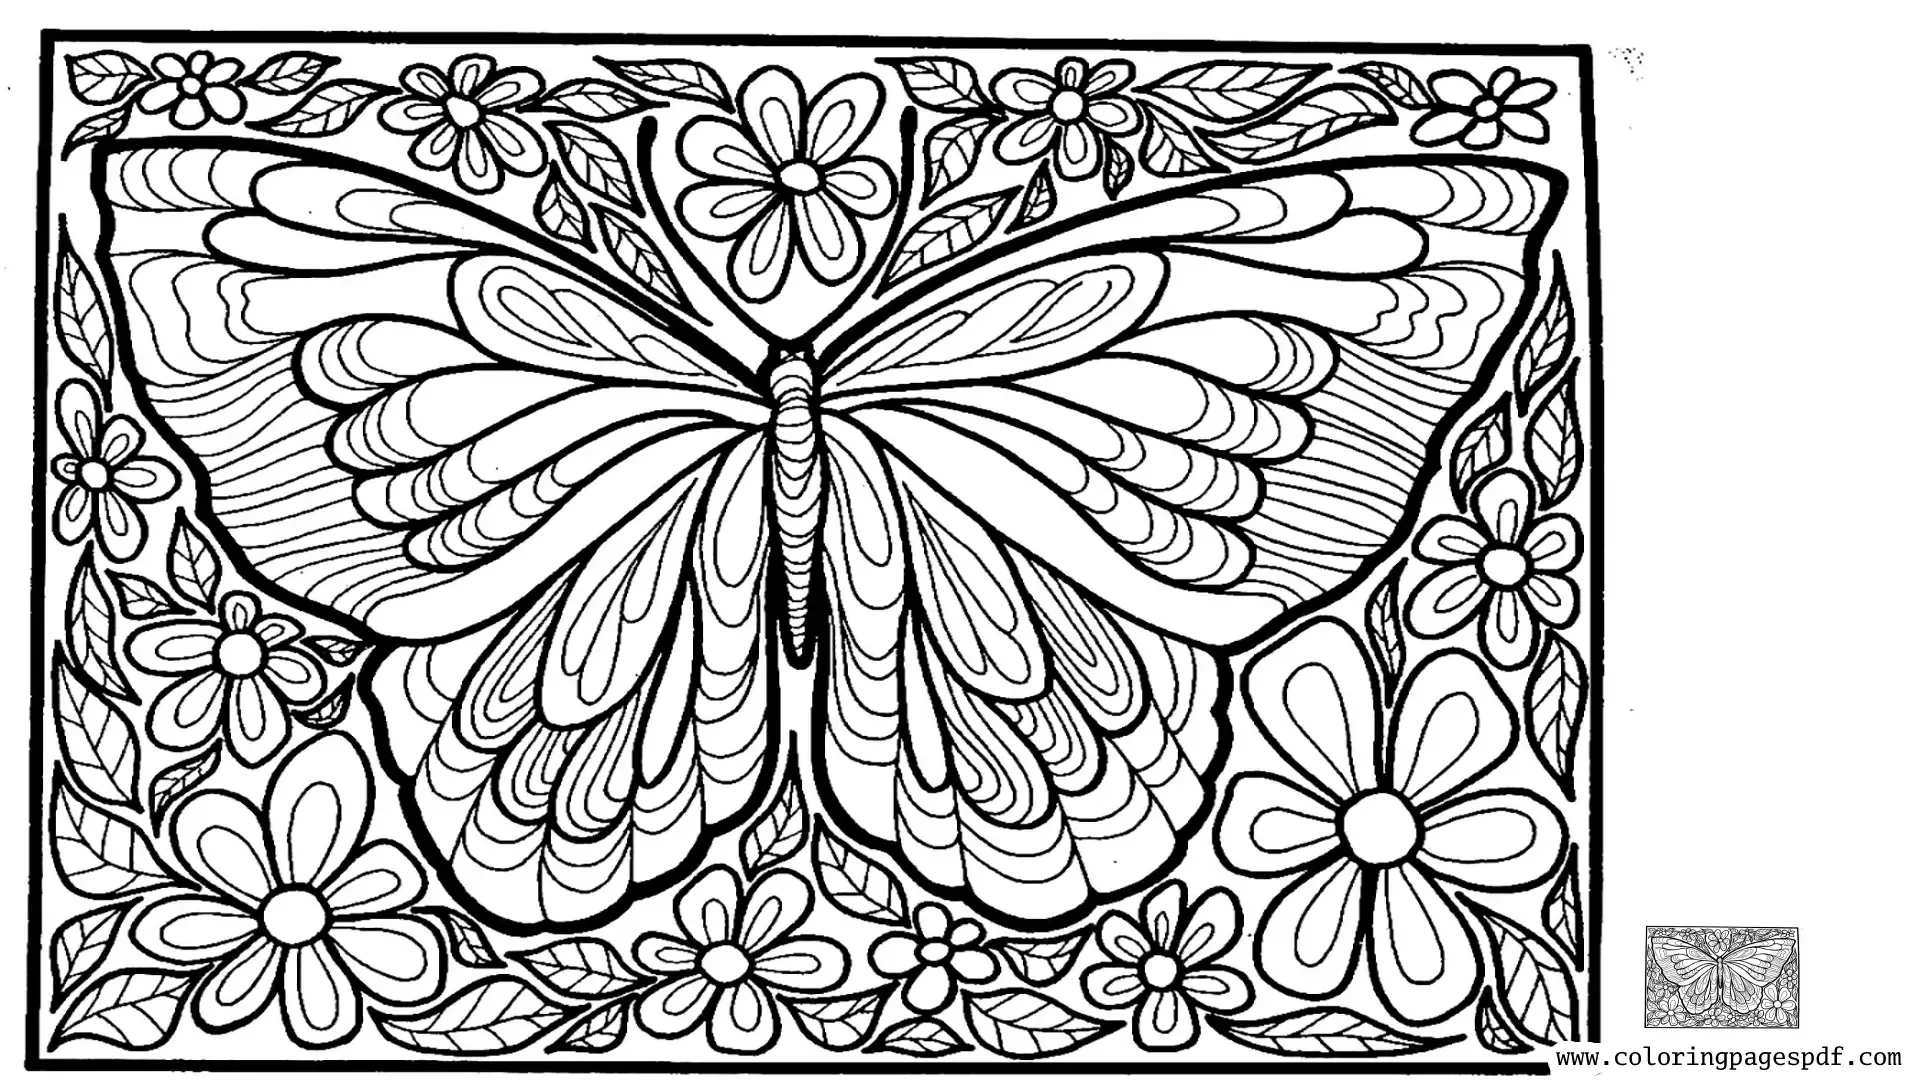 Coloring Page Of Butterfly And Flowers Mandala